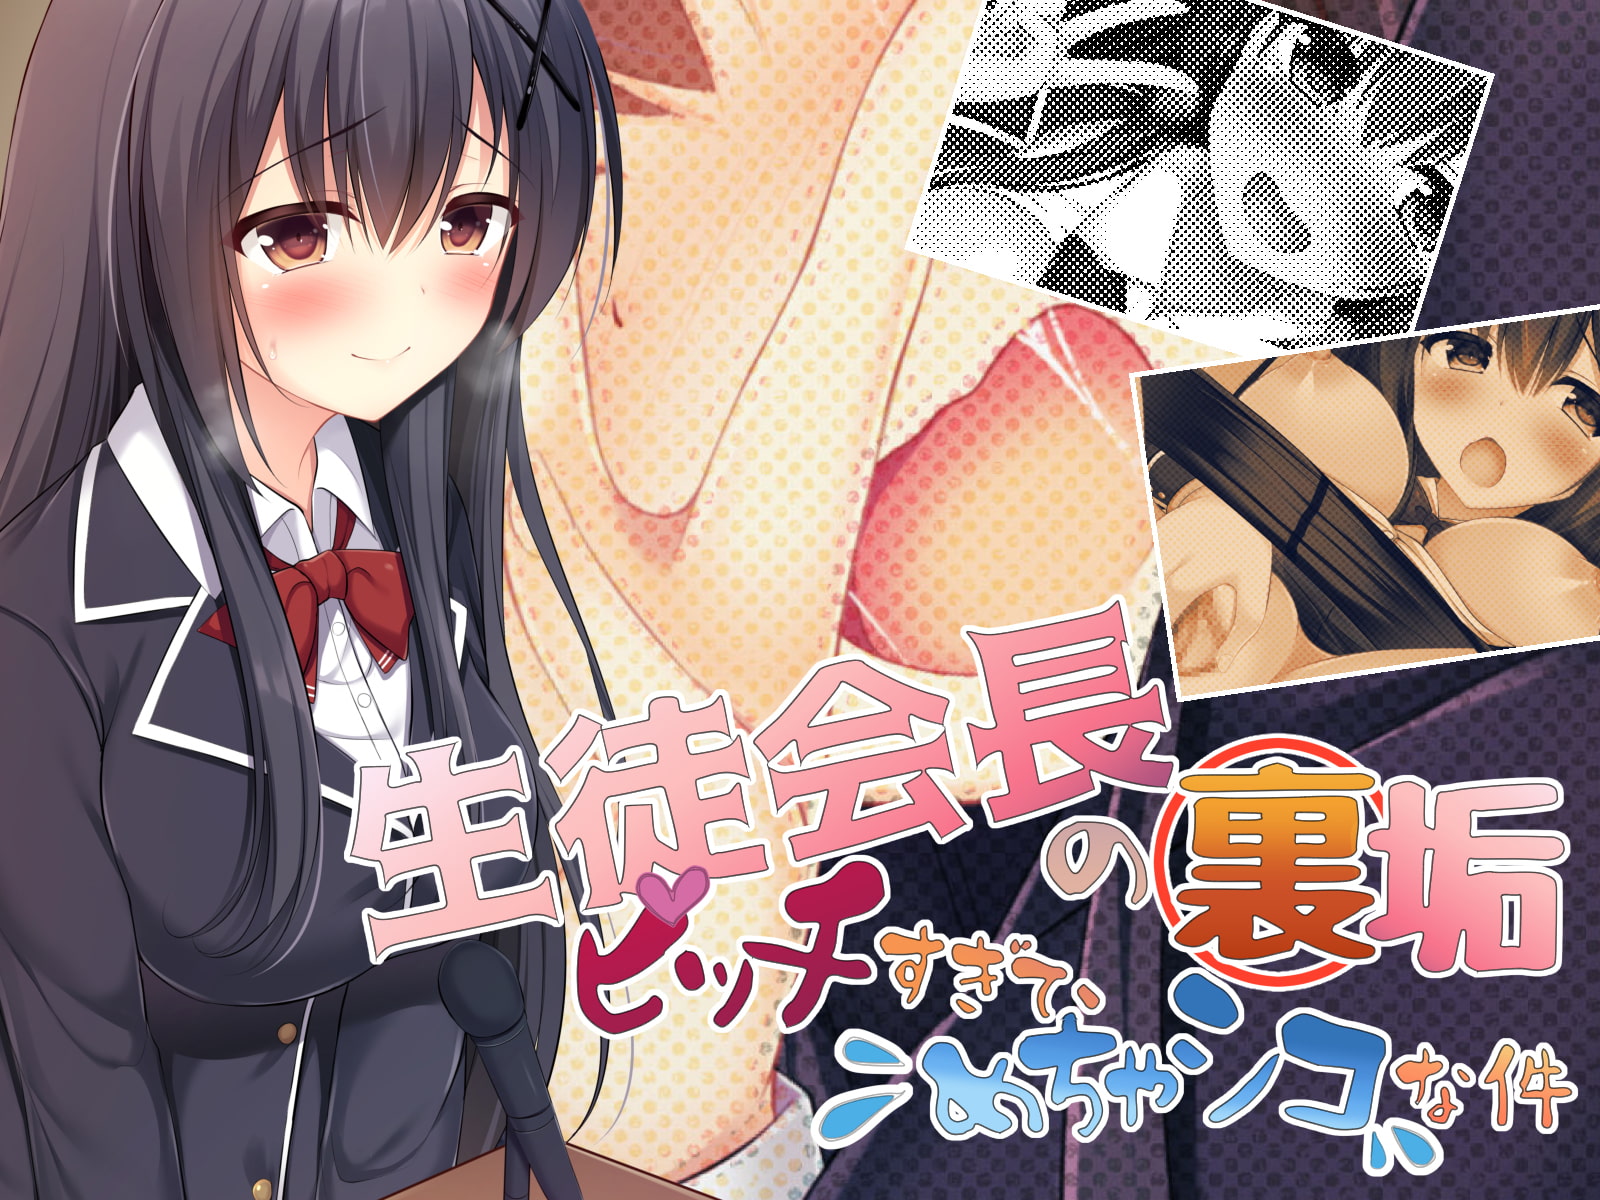 Our Student Council President's Incognito Account Is Too Slutty and Fap-Worthy